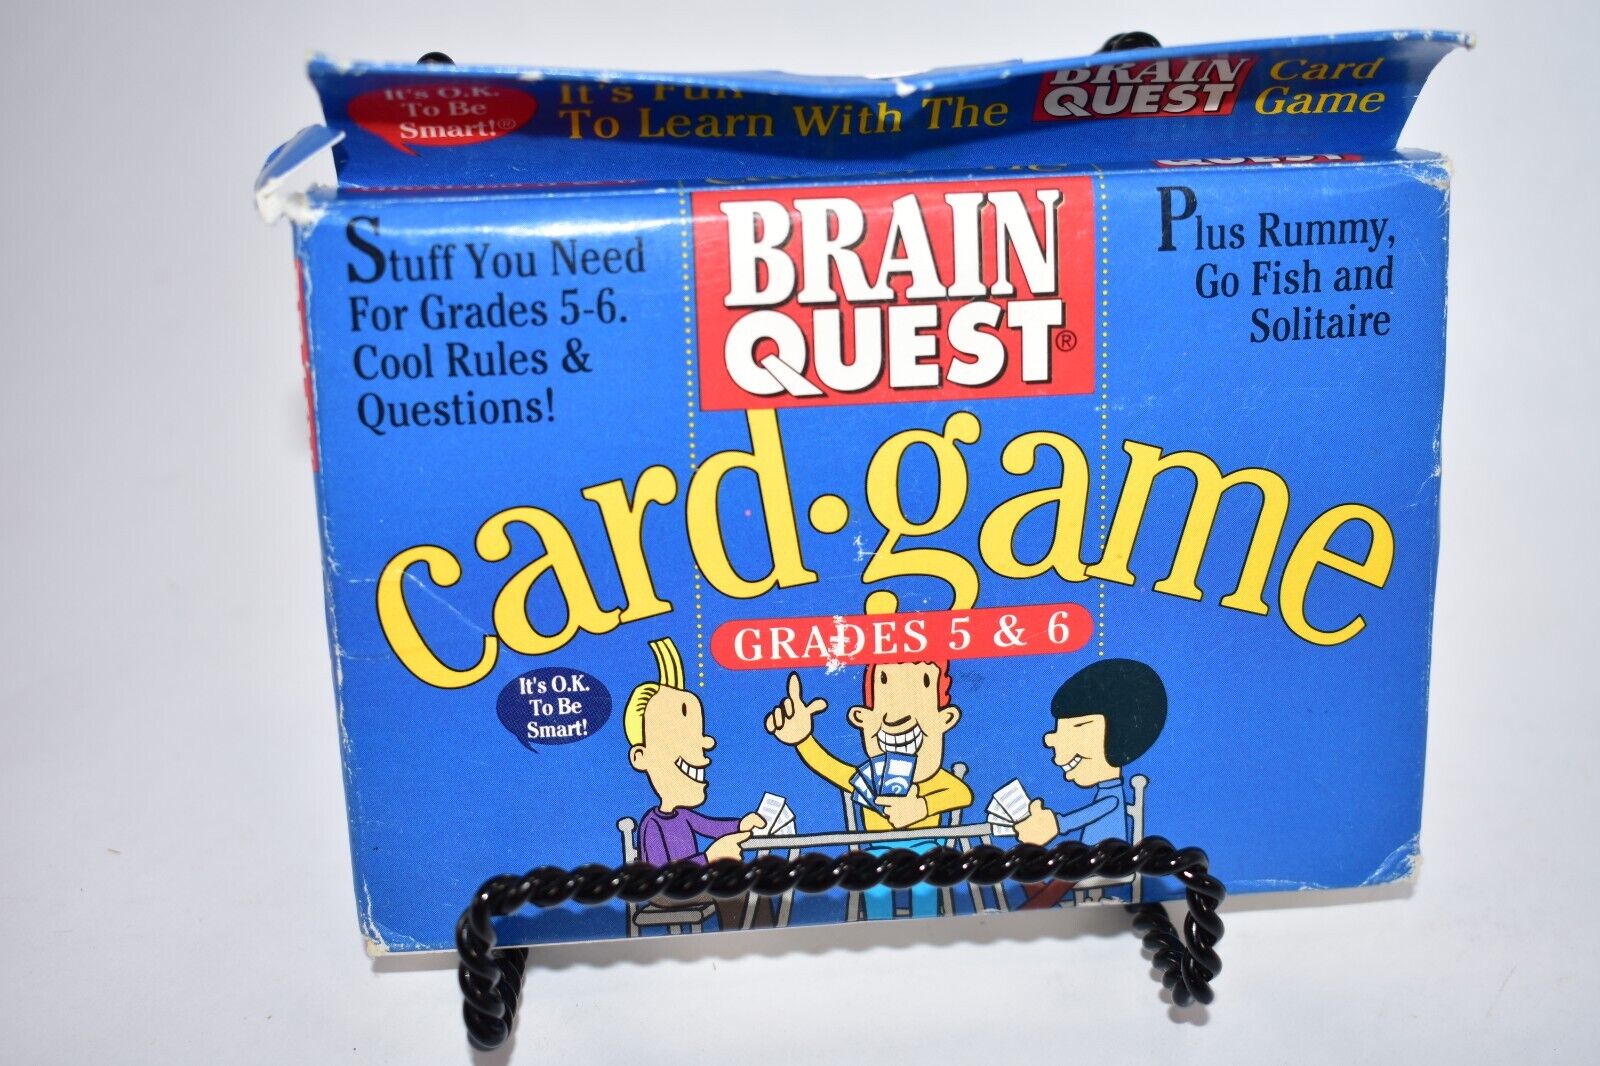 BRAIN QUEST CARD GAME FOR GRADES 5 & 6 RUMMY GO FISH SOLITAIRE EDUCATIONAL